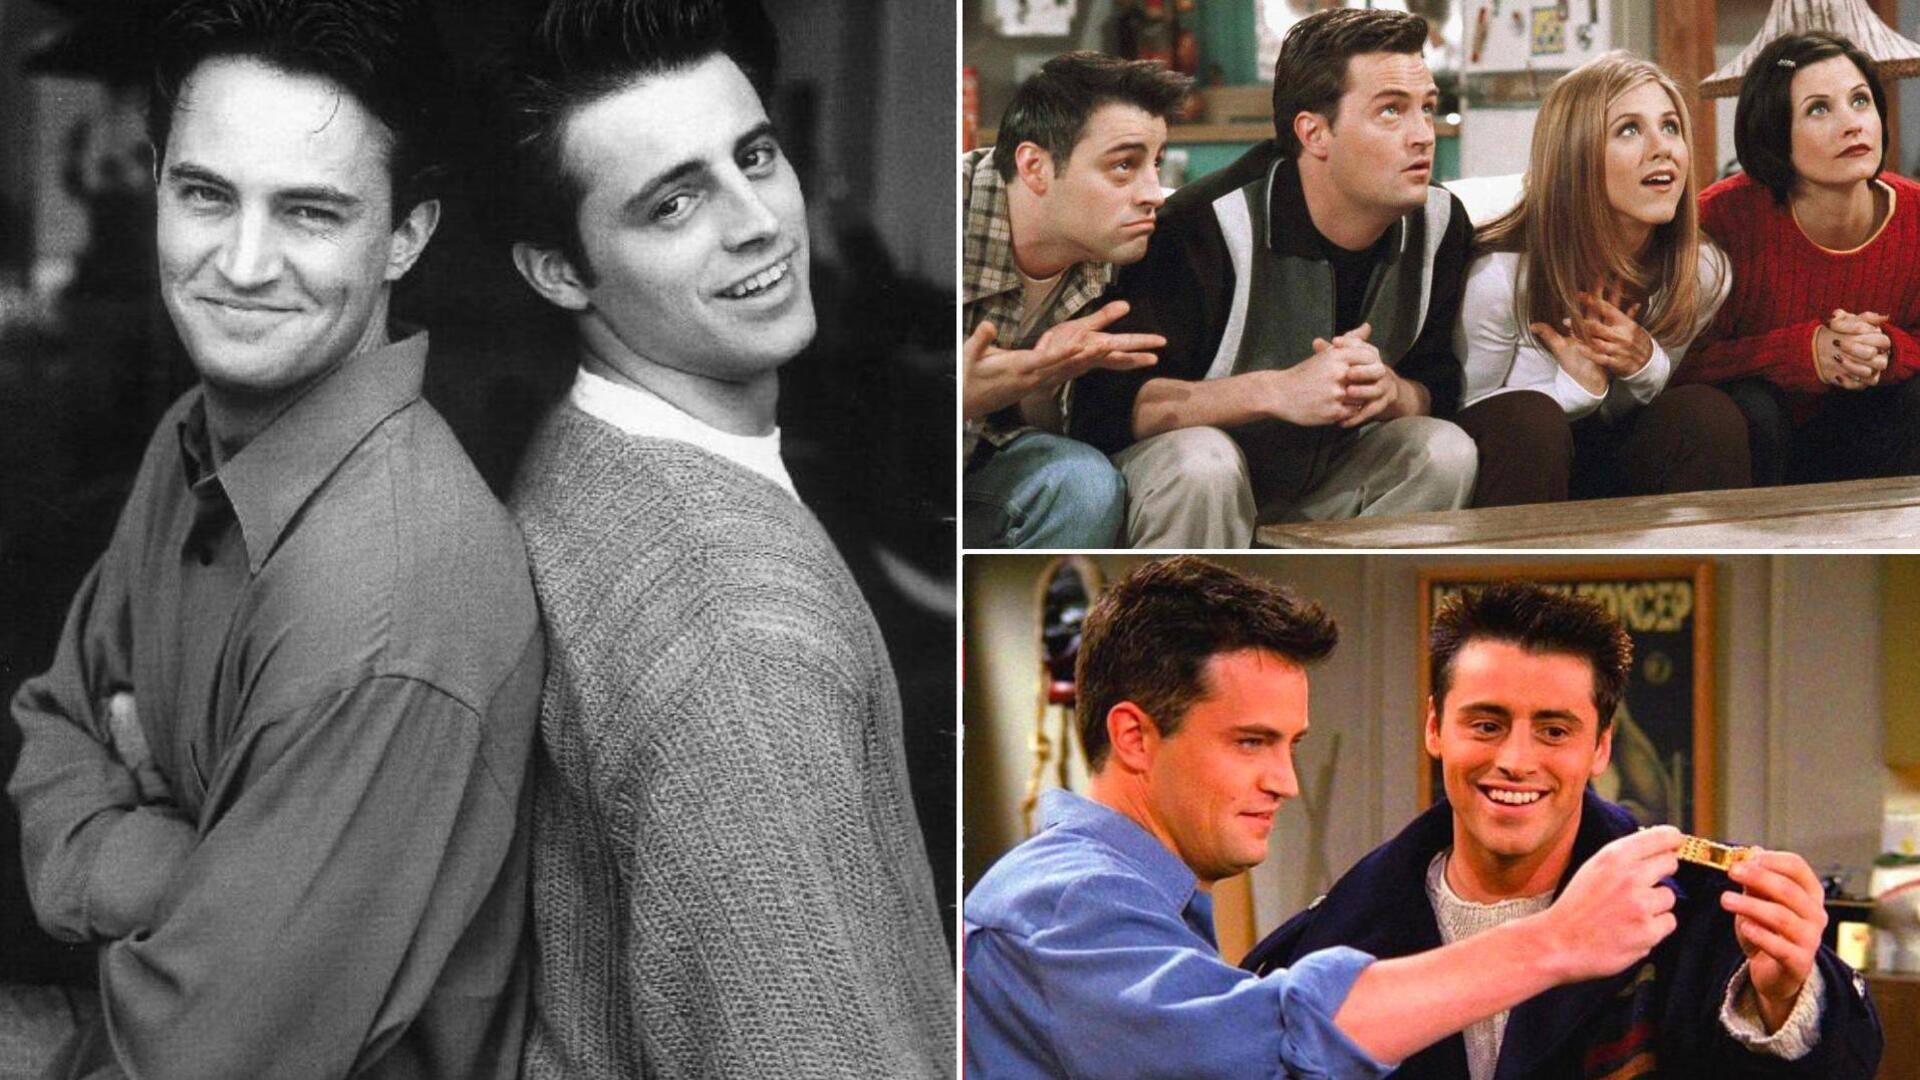 Remembering Matthew Perry: Chandler Bing's unforgettable life lessons from 'F.R.I.E.N.D.S' 